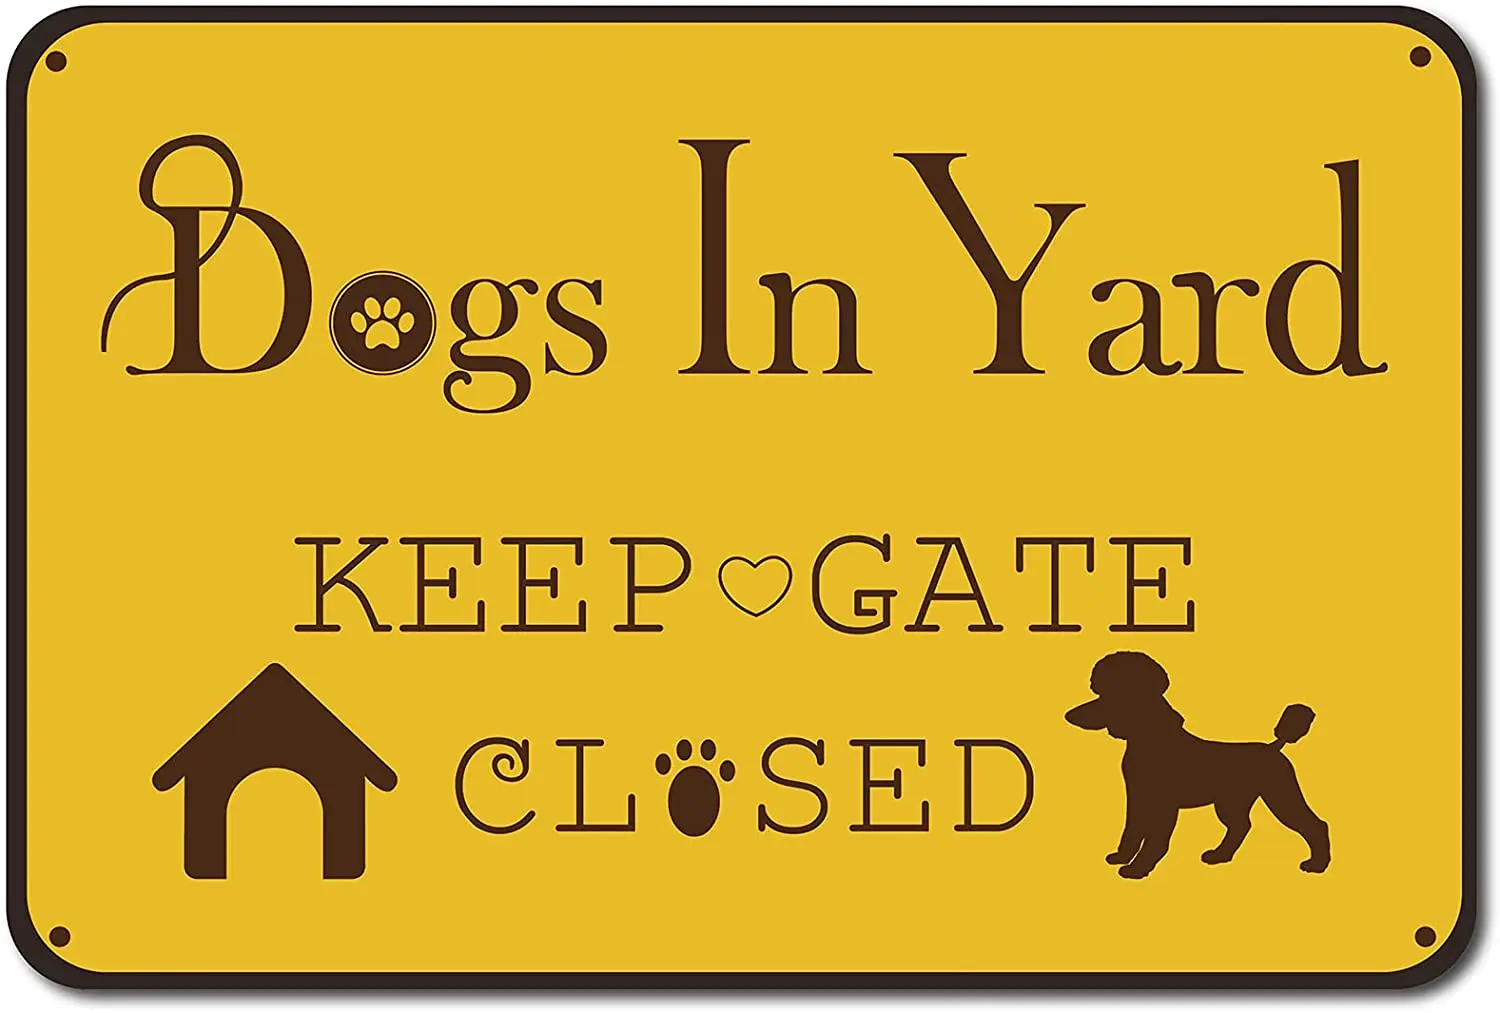 

Metal Tin Sign Please Keep Gate Closed Dogs In Yard Vintage Funny Wall Art Garden House Plaque for Kitchen Living Room Decor